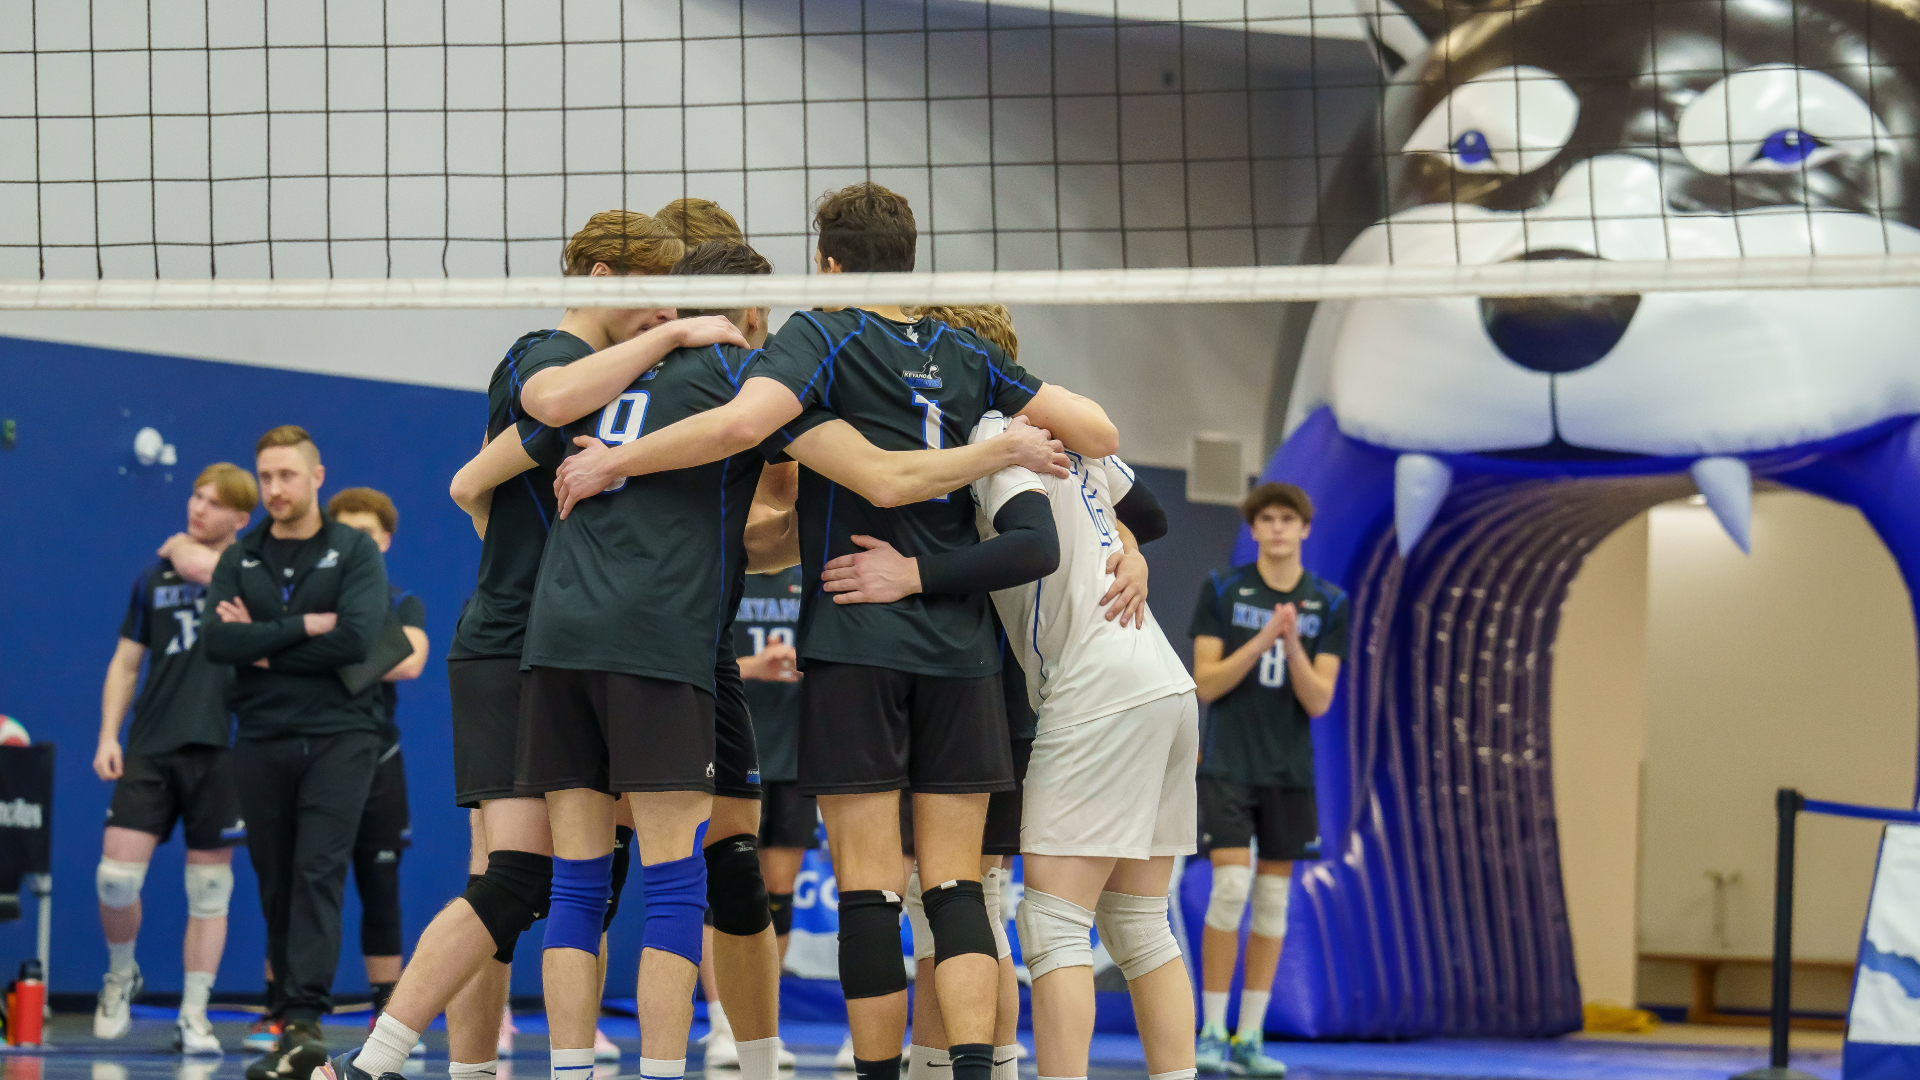 Men's Volleyball Huskies clinch first in ACAC North, perfect home record with wins over Trojans, Broncos